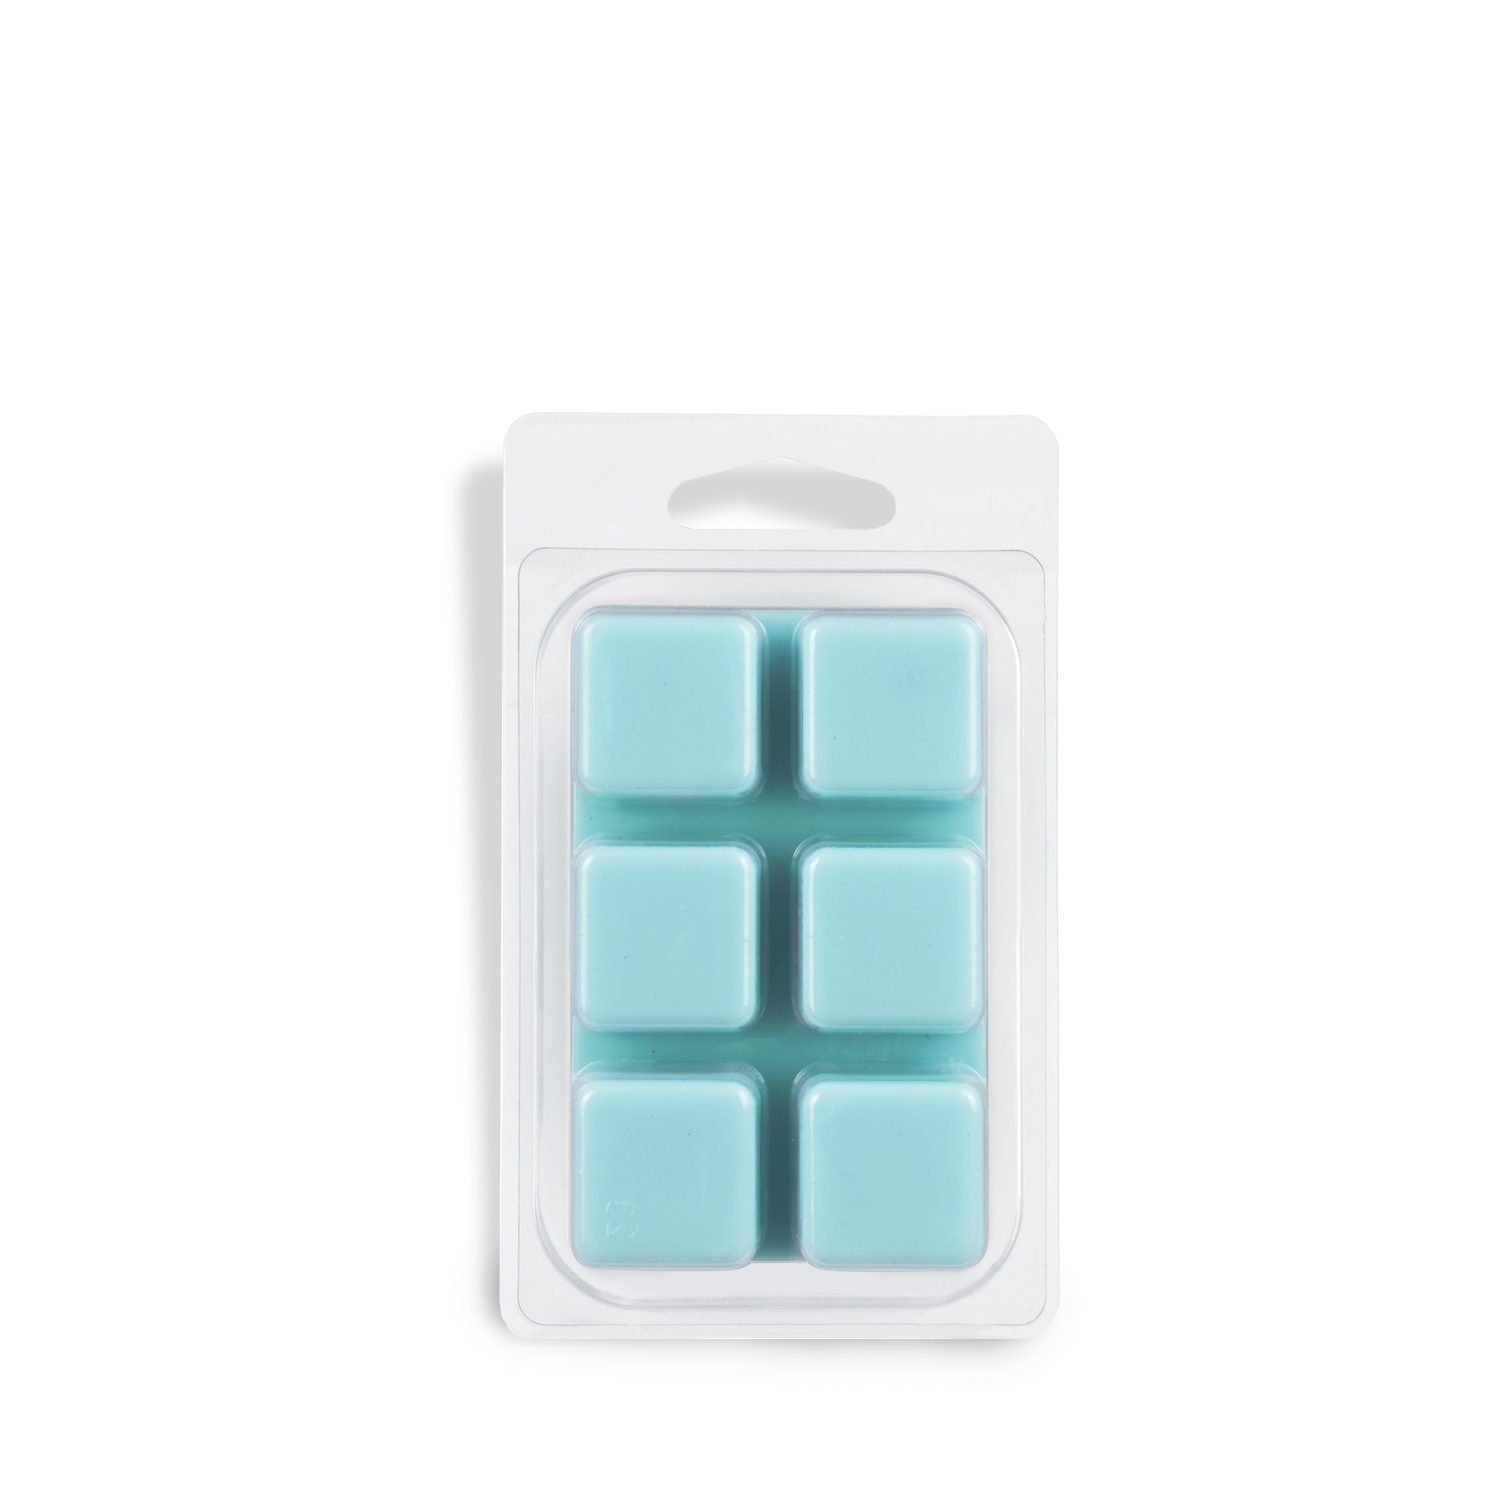 Pack of Pacific Crush scented wax melts in plastic packaging on a white background by Tuscany Candle® SEASONAL.